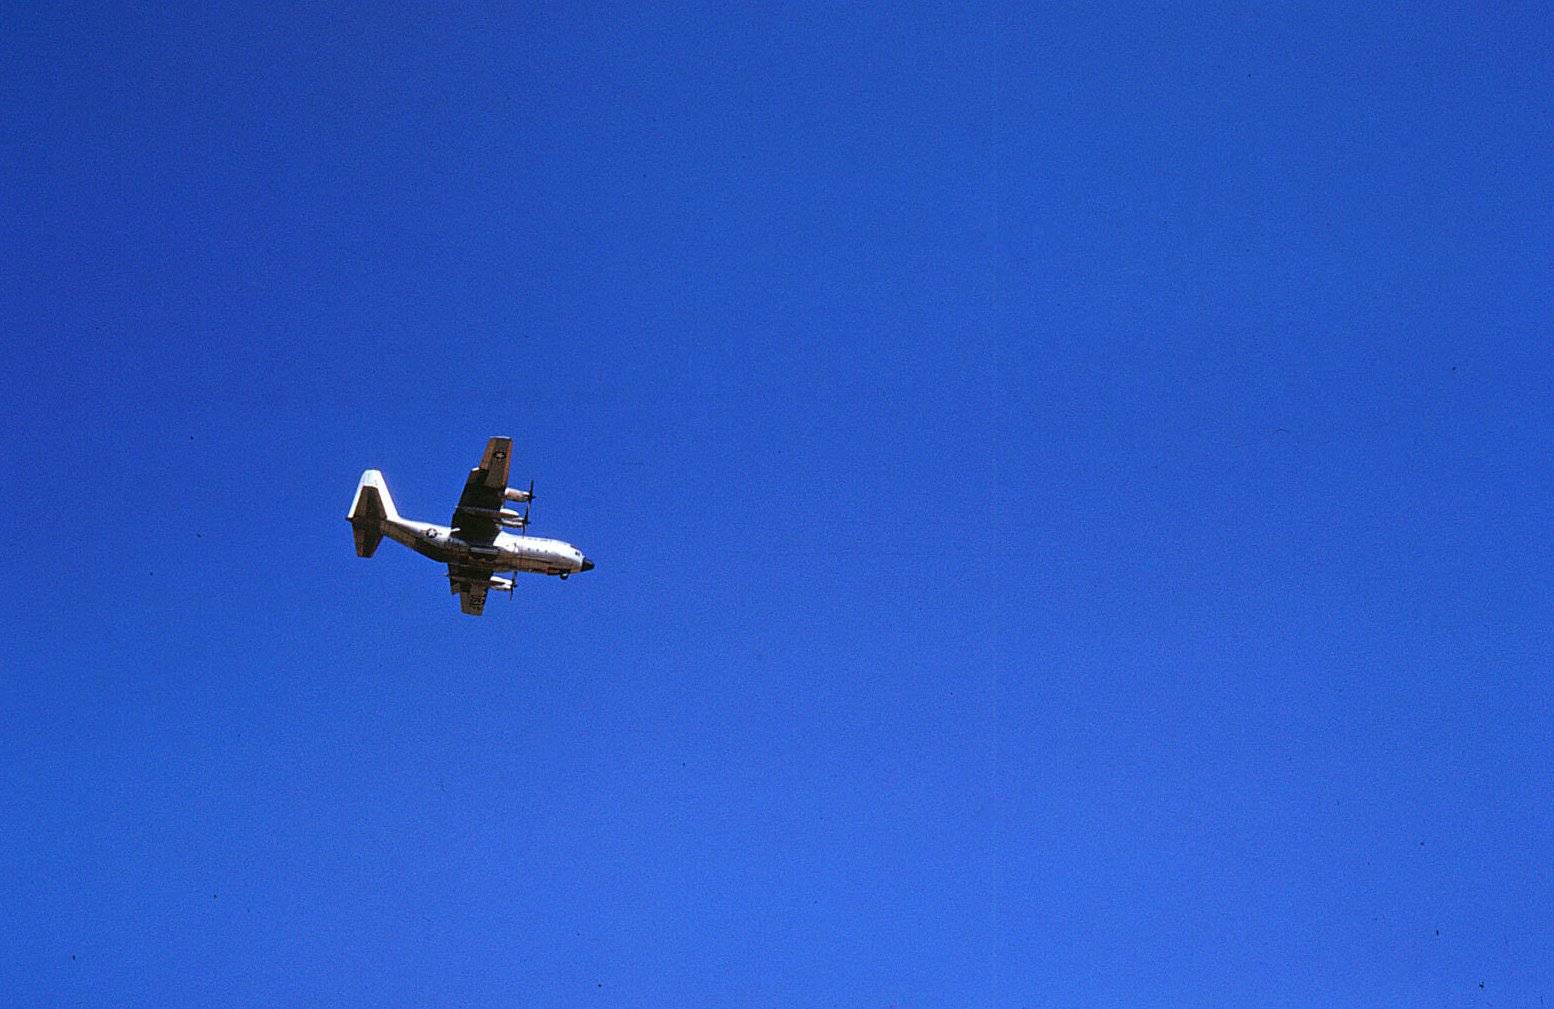 A plane against a bright blue, cloudless sky.